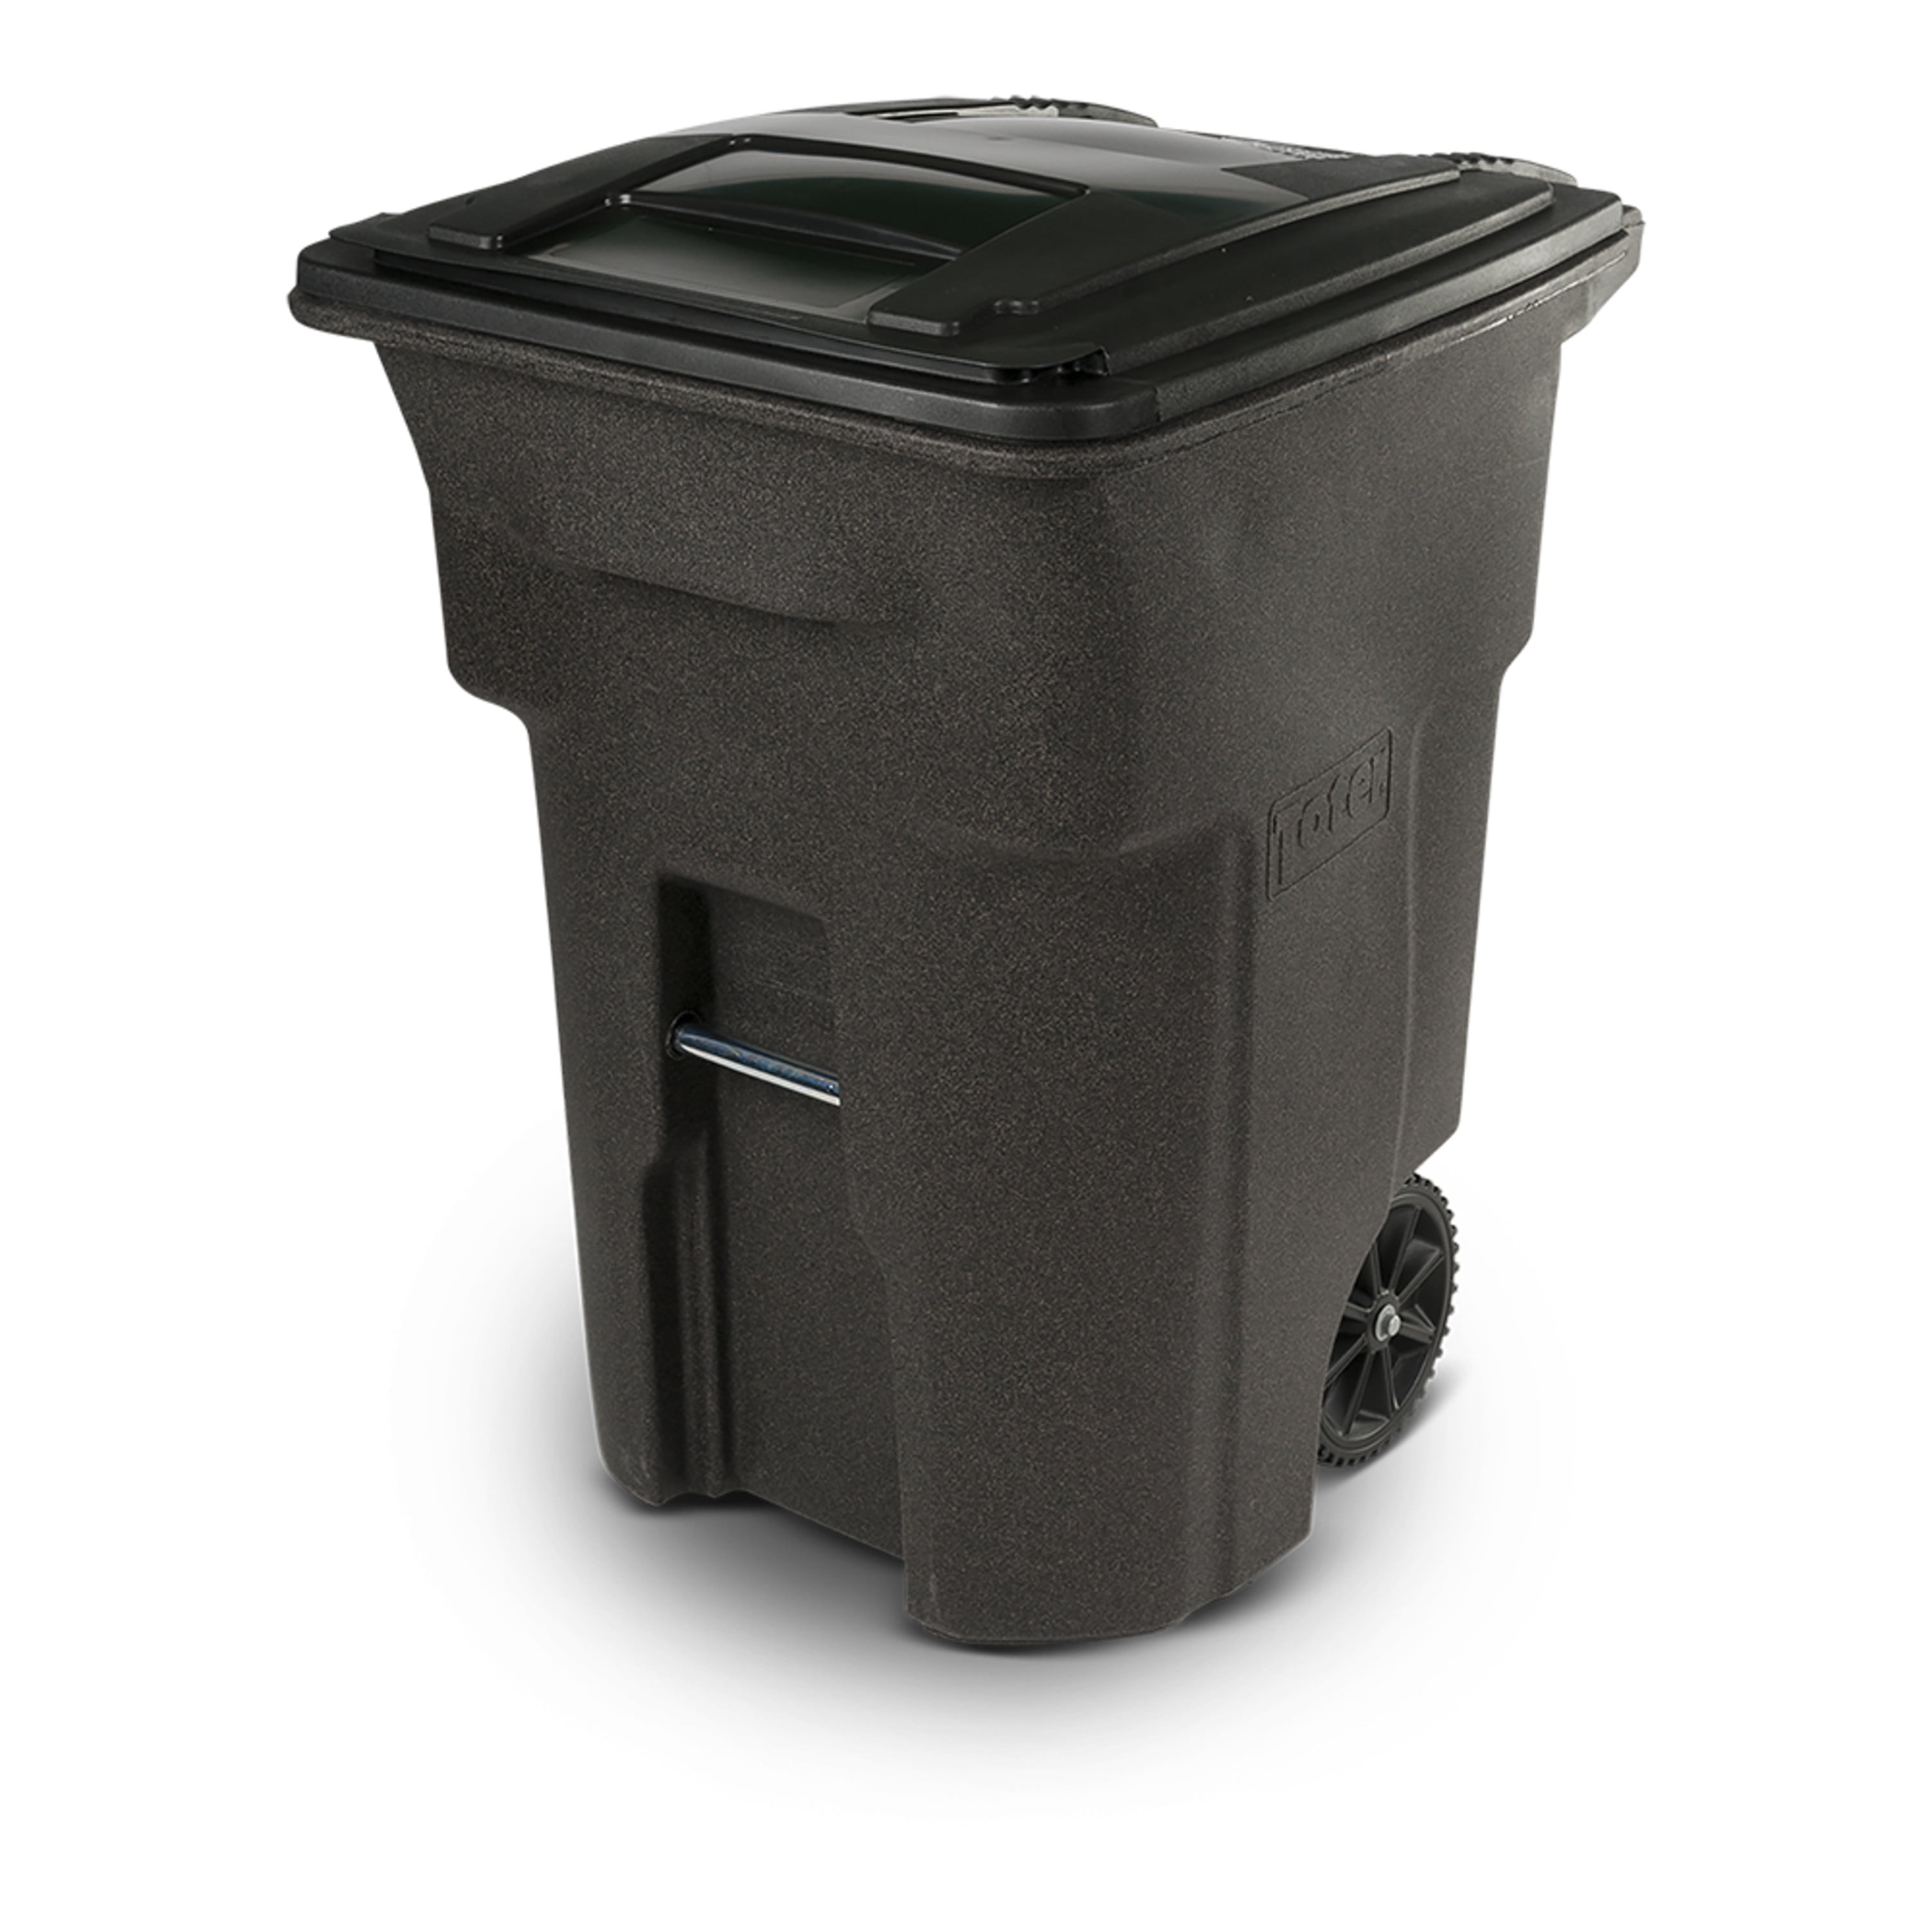 Toter 96 Gal. Trash Can Brownstone with Wheels and Lid - Walmart